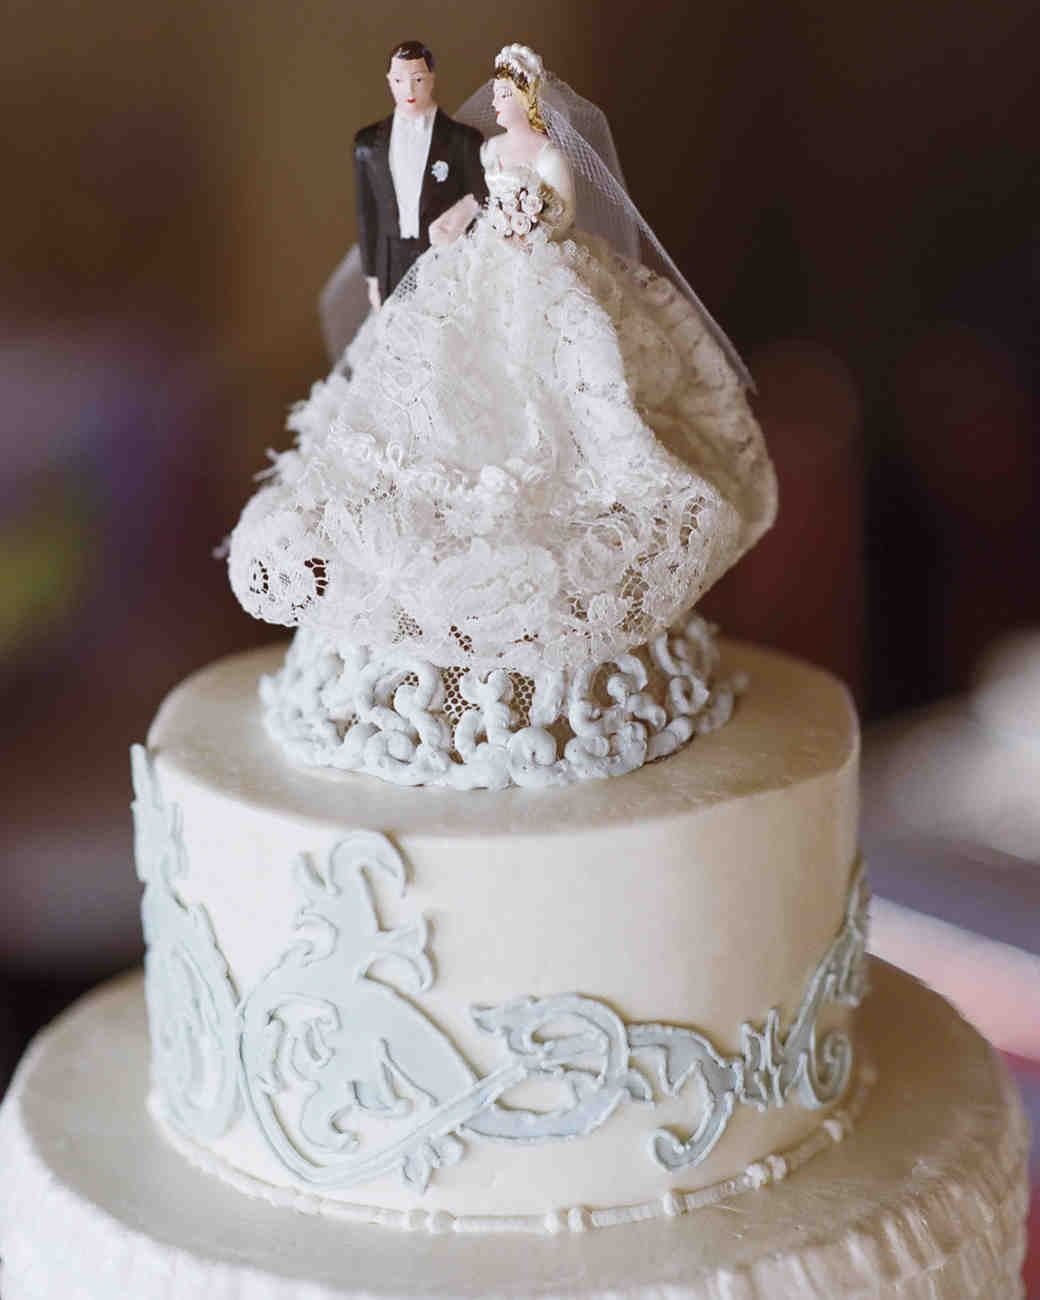 Wedding Cakes Top
 36 of the Best Wedding Cake Toppers